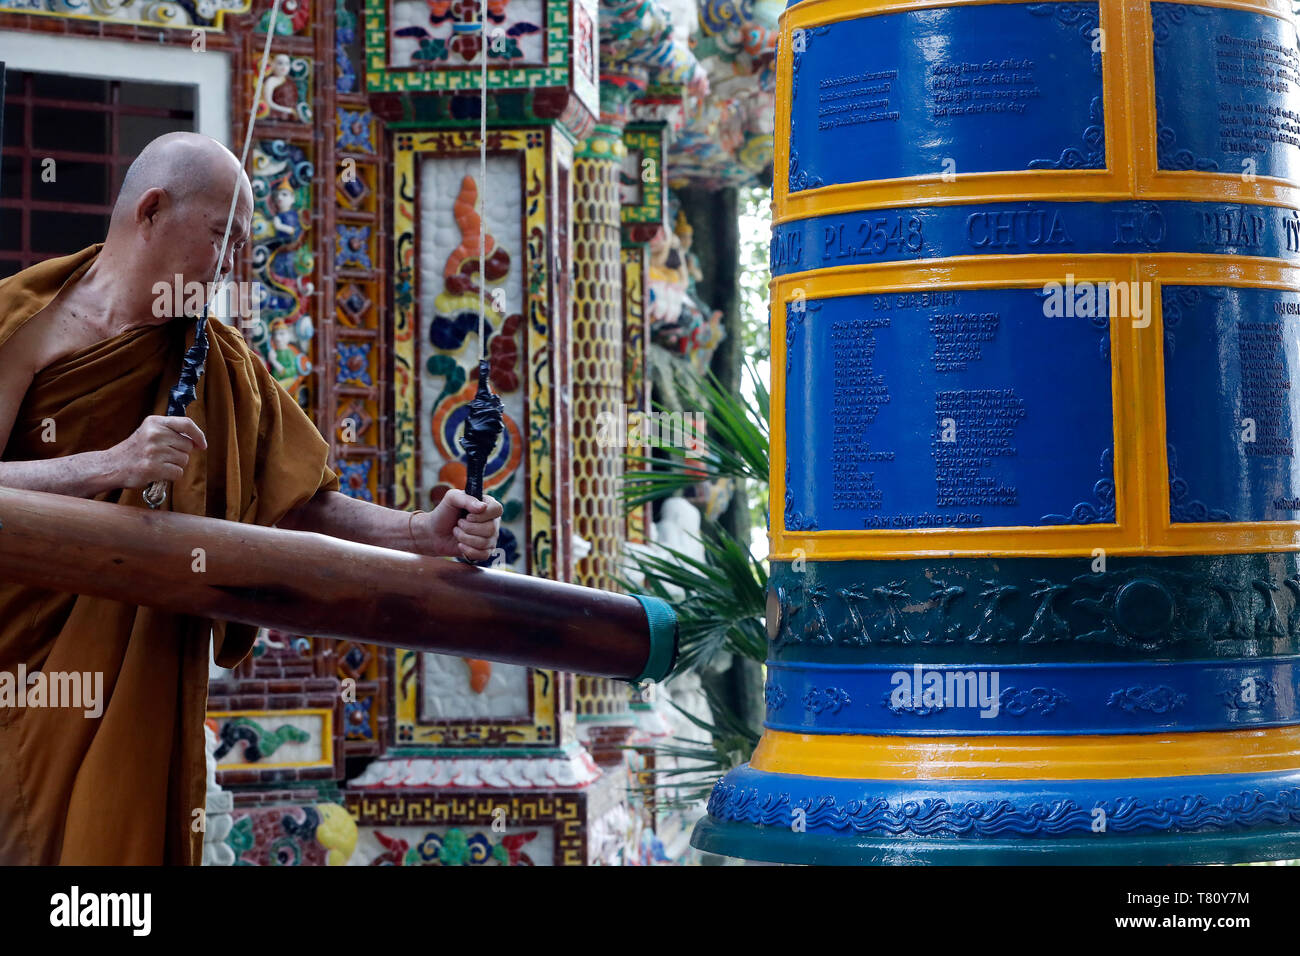 Ho Phap Buddhist temple, monk ringing bell in monastery, Vung Tau, Vietnam, Indochina, Southeast Asia, Asia Stock Photo